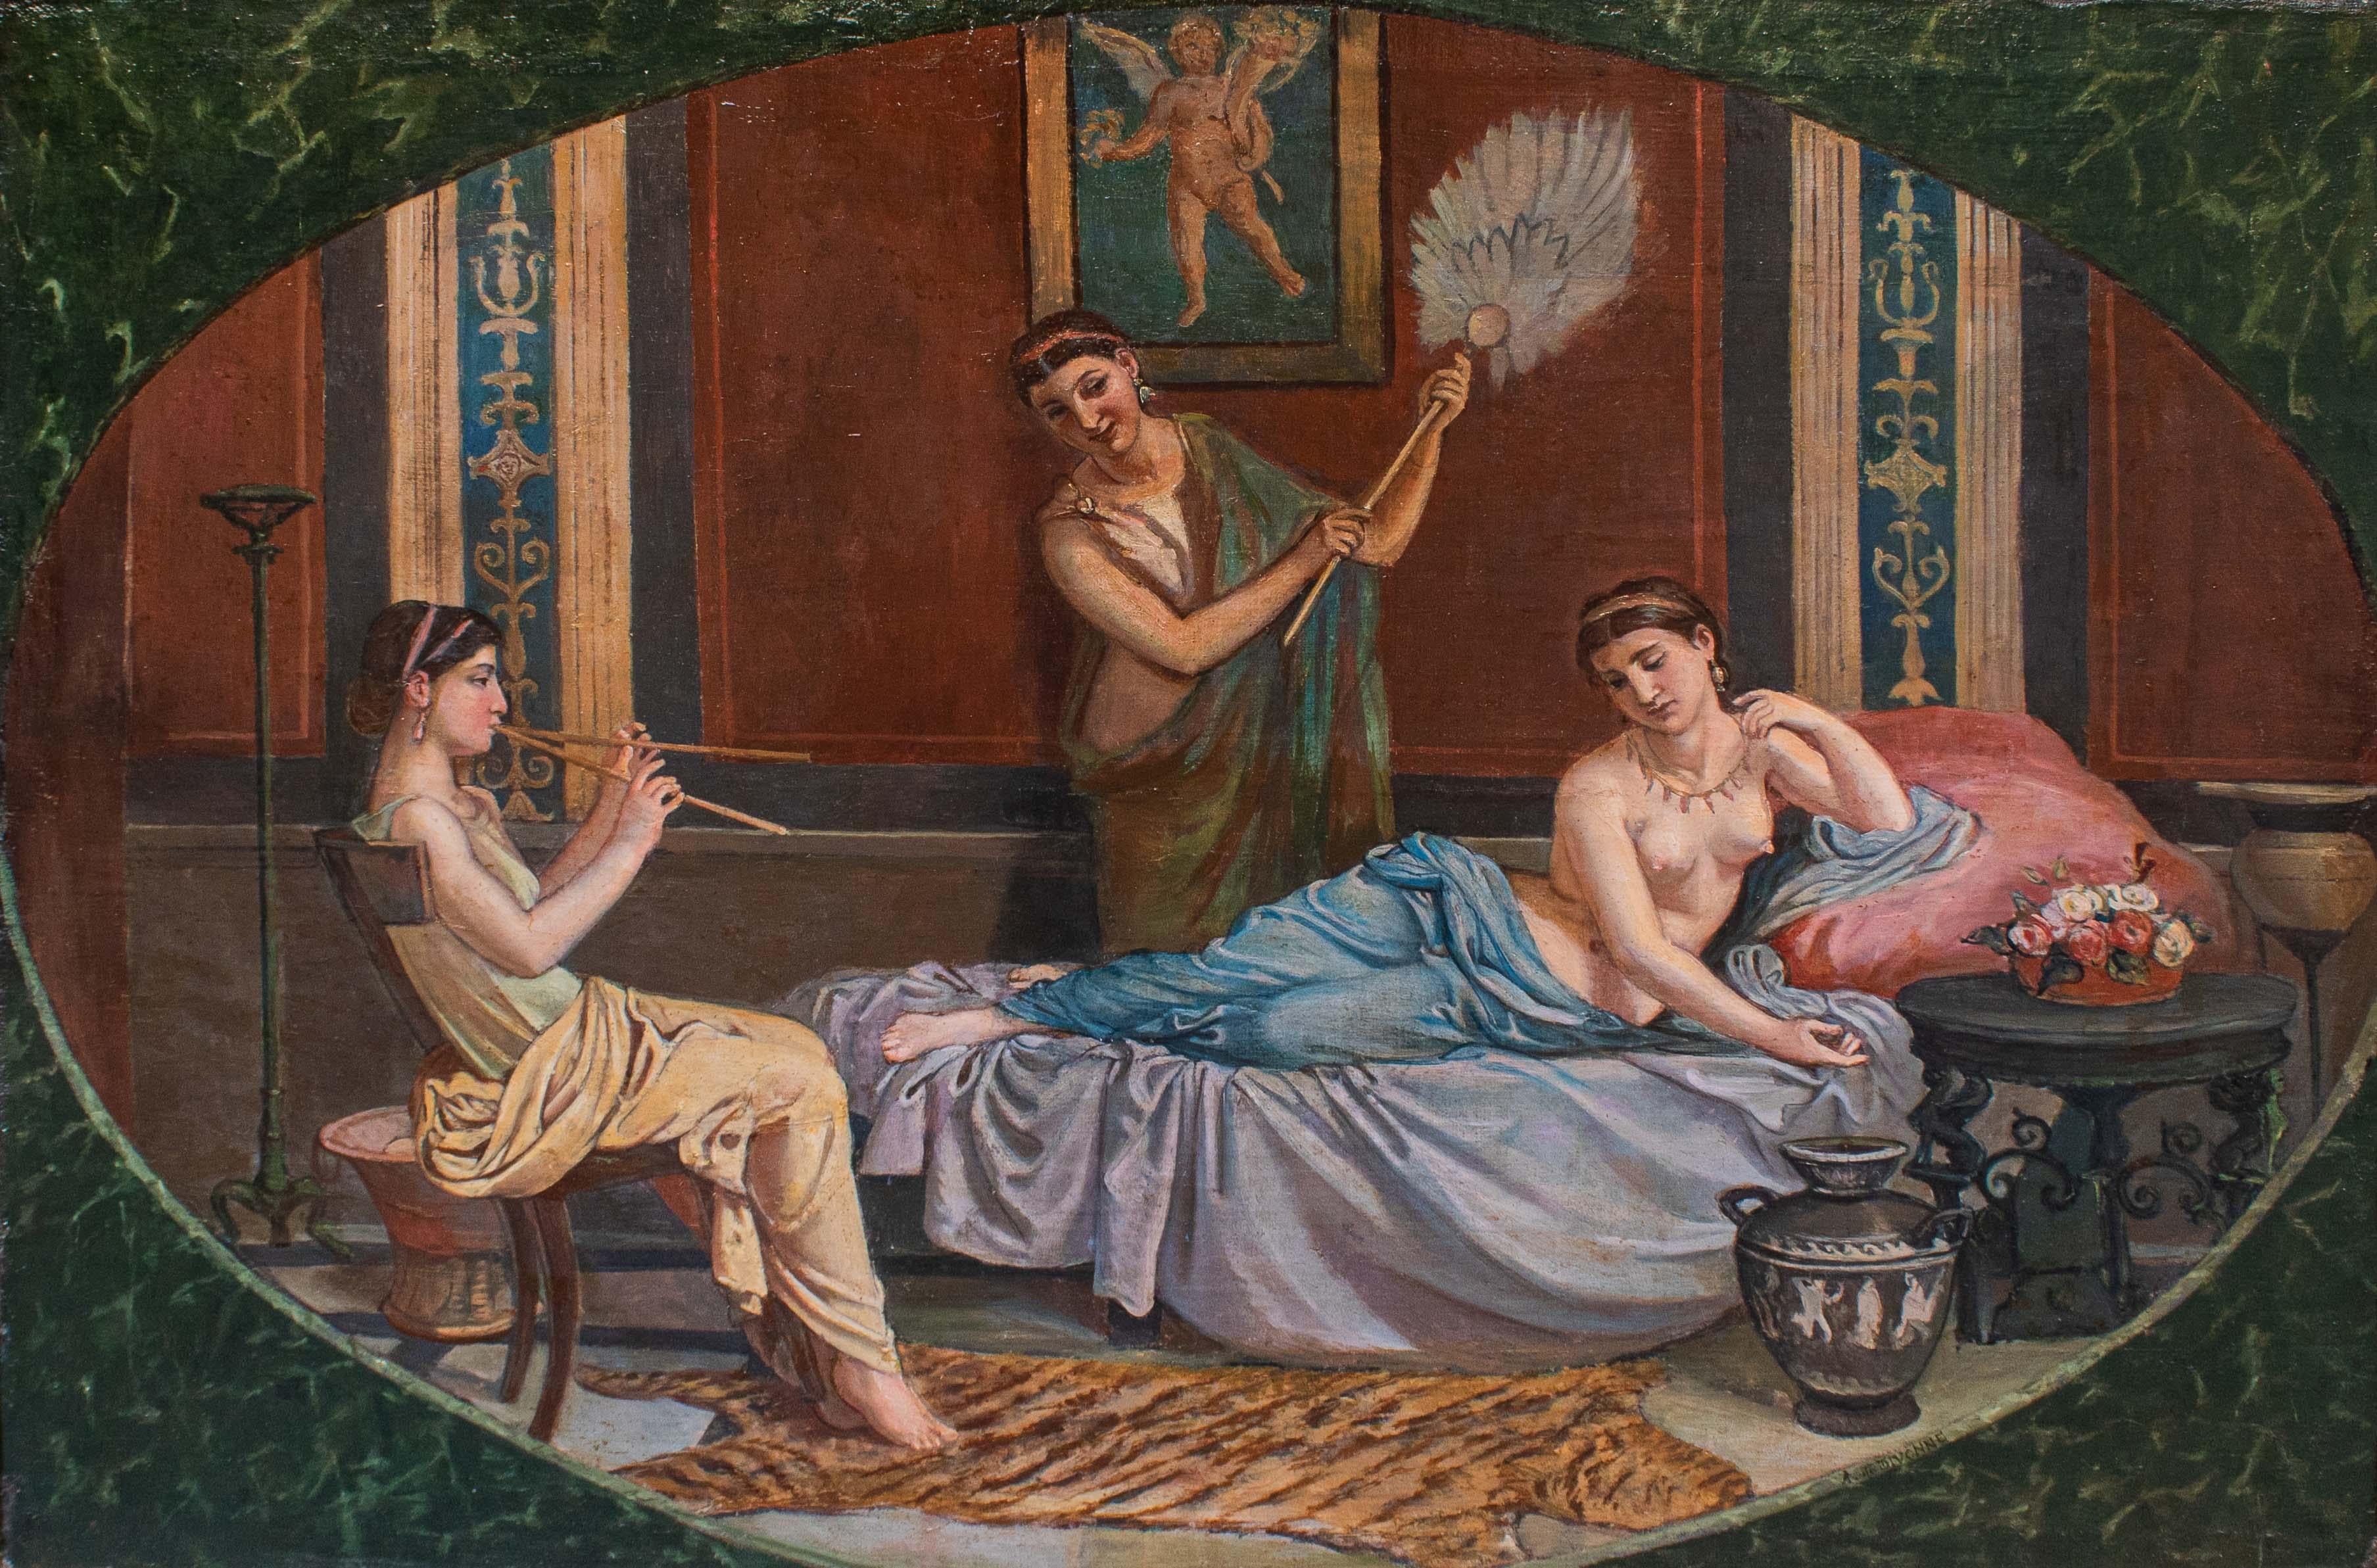 19th Century
Pompeian genre scene
Oil on canvas, 73.5 x 104 cm - with frame 87 x 118 cm

The work in question depicts an interior scene in which a woman, half-naked and lying on a triclinium wrapped in light cloths, rests to the music of a